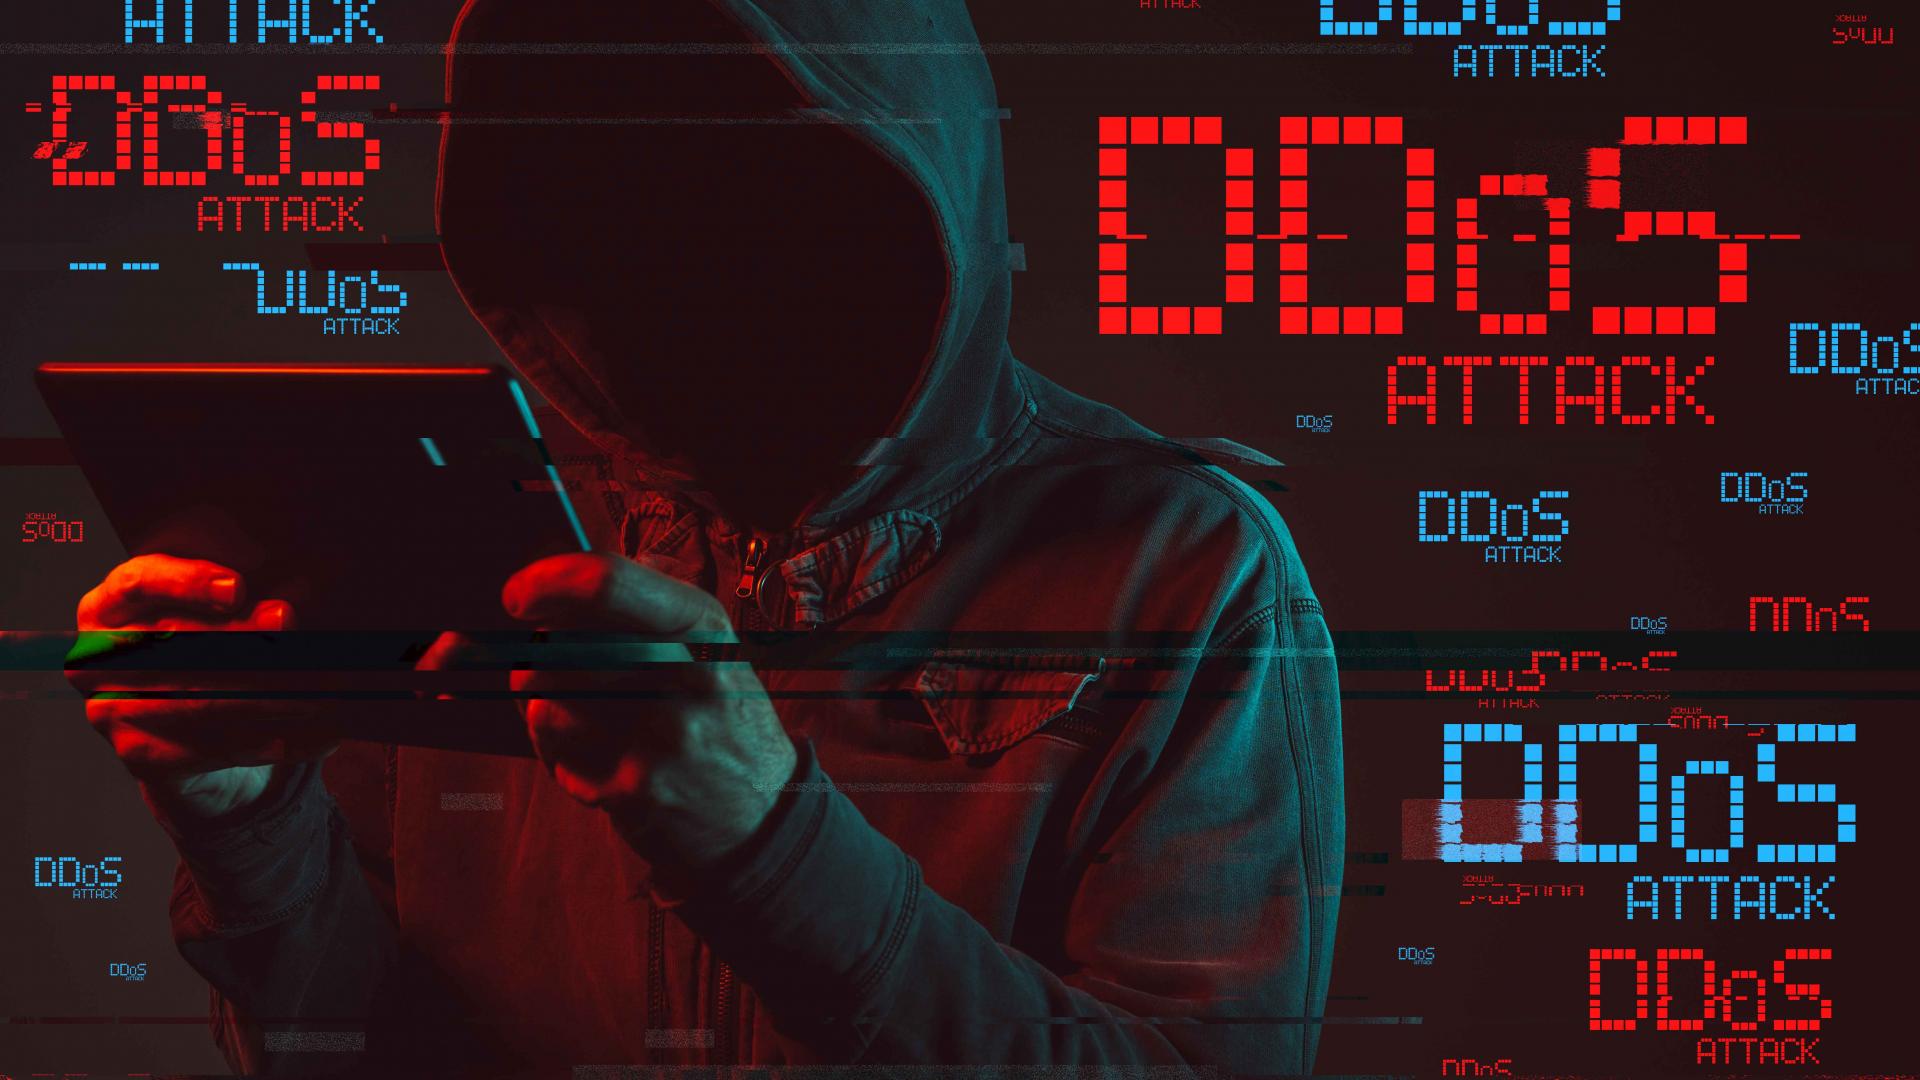 What is a DDos attack?